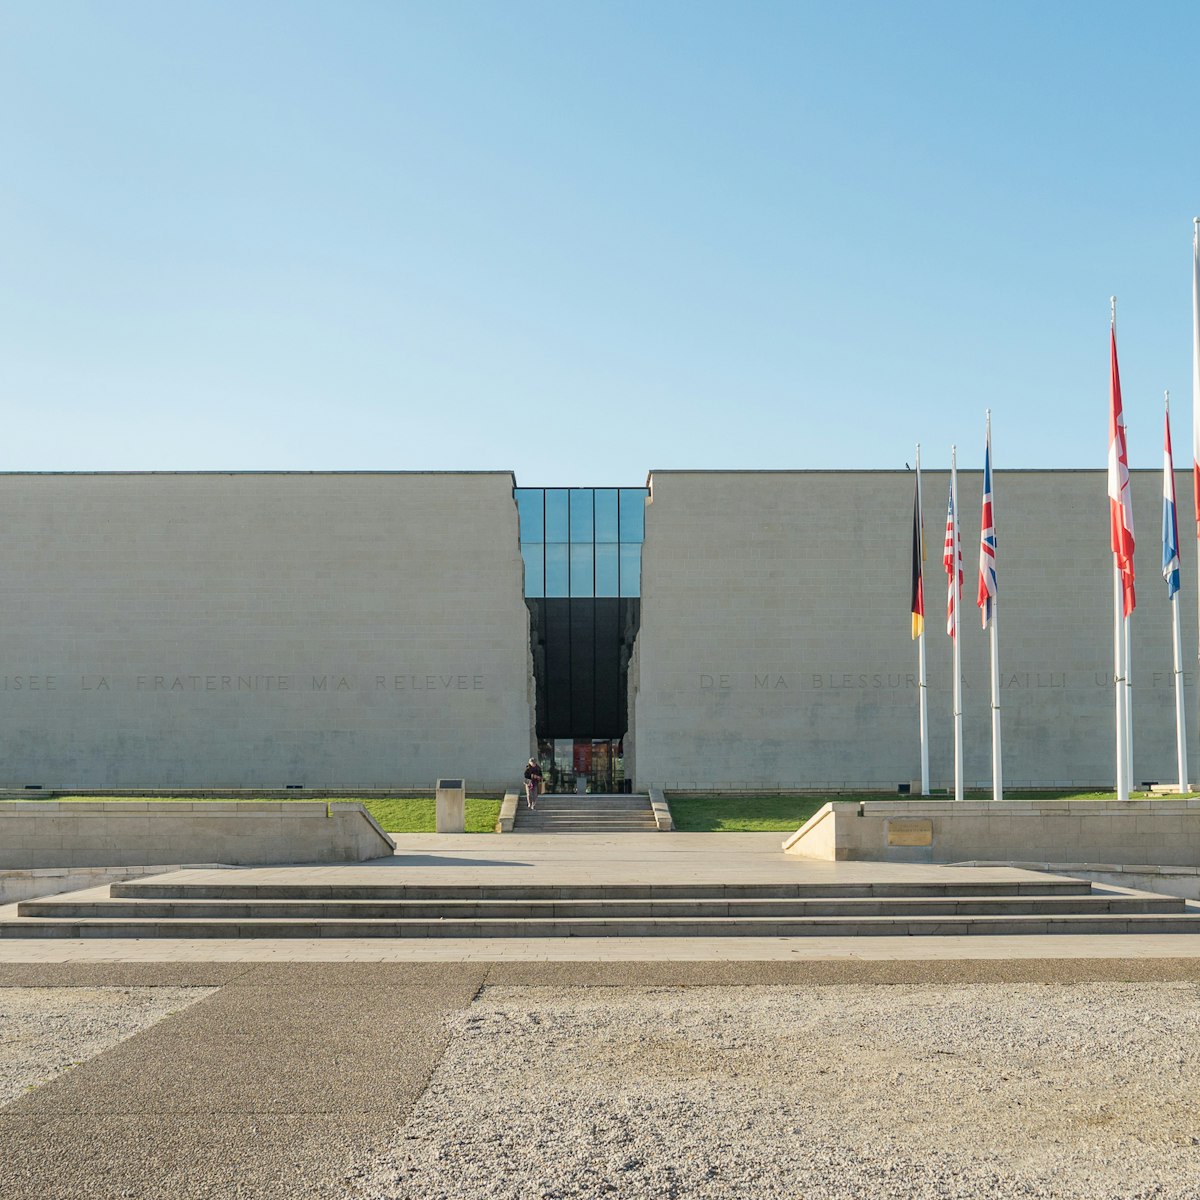 CAEN, FRANCE - OCTOBER 22, 2016: The Memorial de Caen is a museum and war memorial in Caen, Normandy, France commemorating the Second World War and the Battle for Caen.; Shutterstock ID 511924579; Your name (First / Last): Daniel Fahey; GL account no.: 65050; Netsuite department name: Online Editorial; Full Product or Project name including edition: BiT Normandy POIs